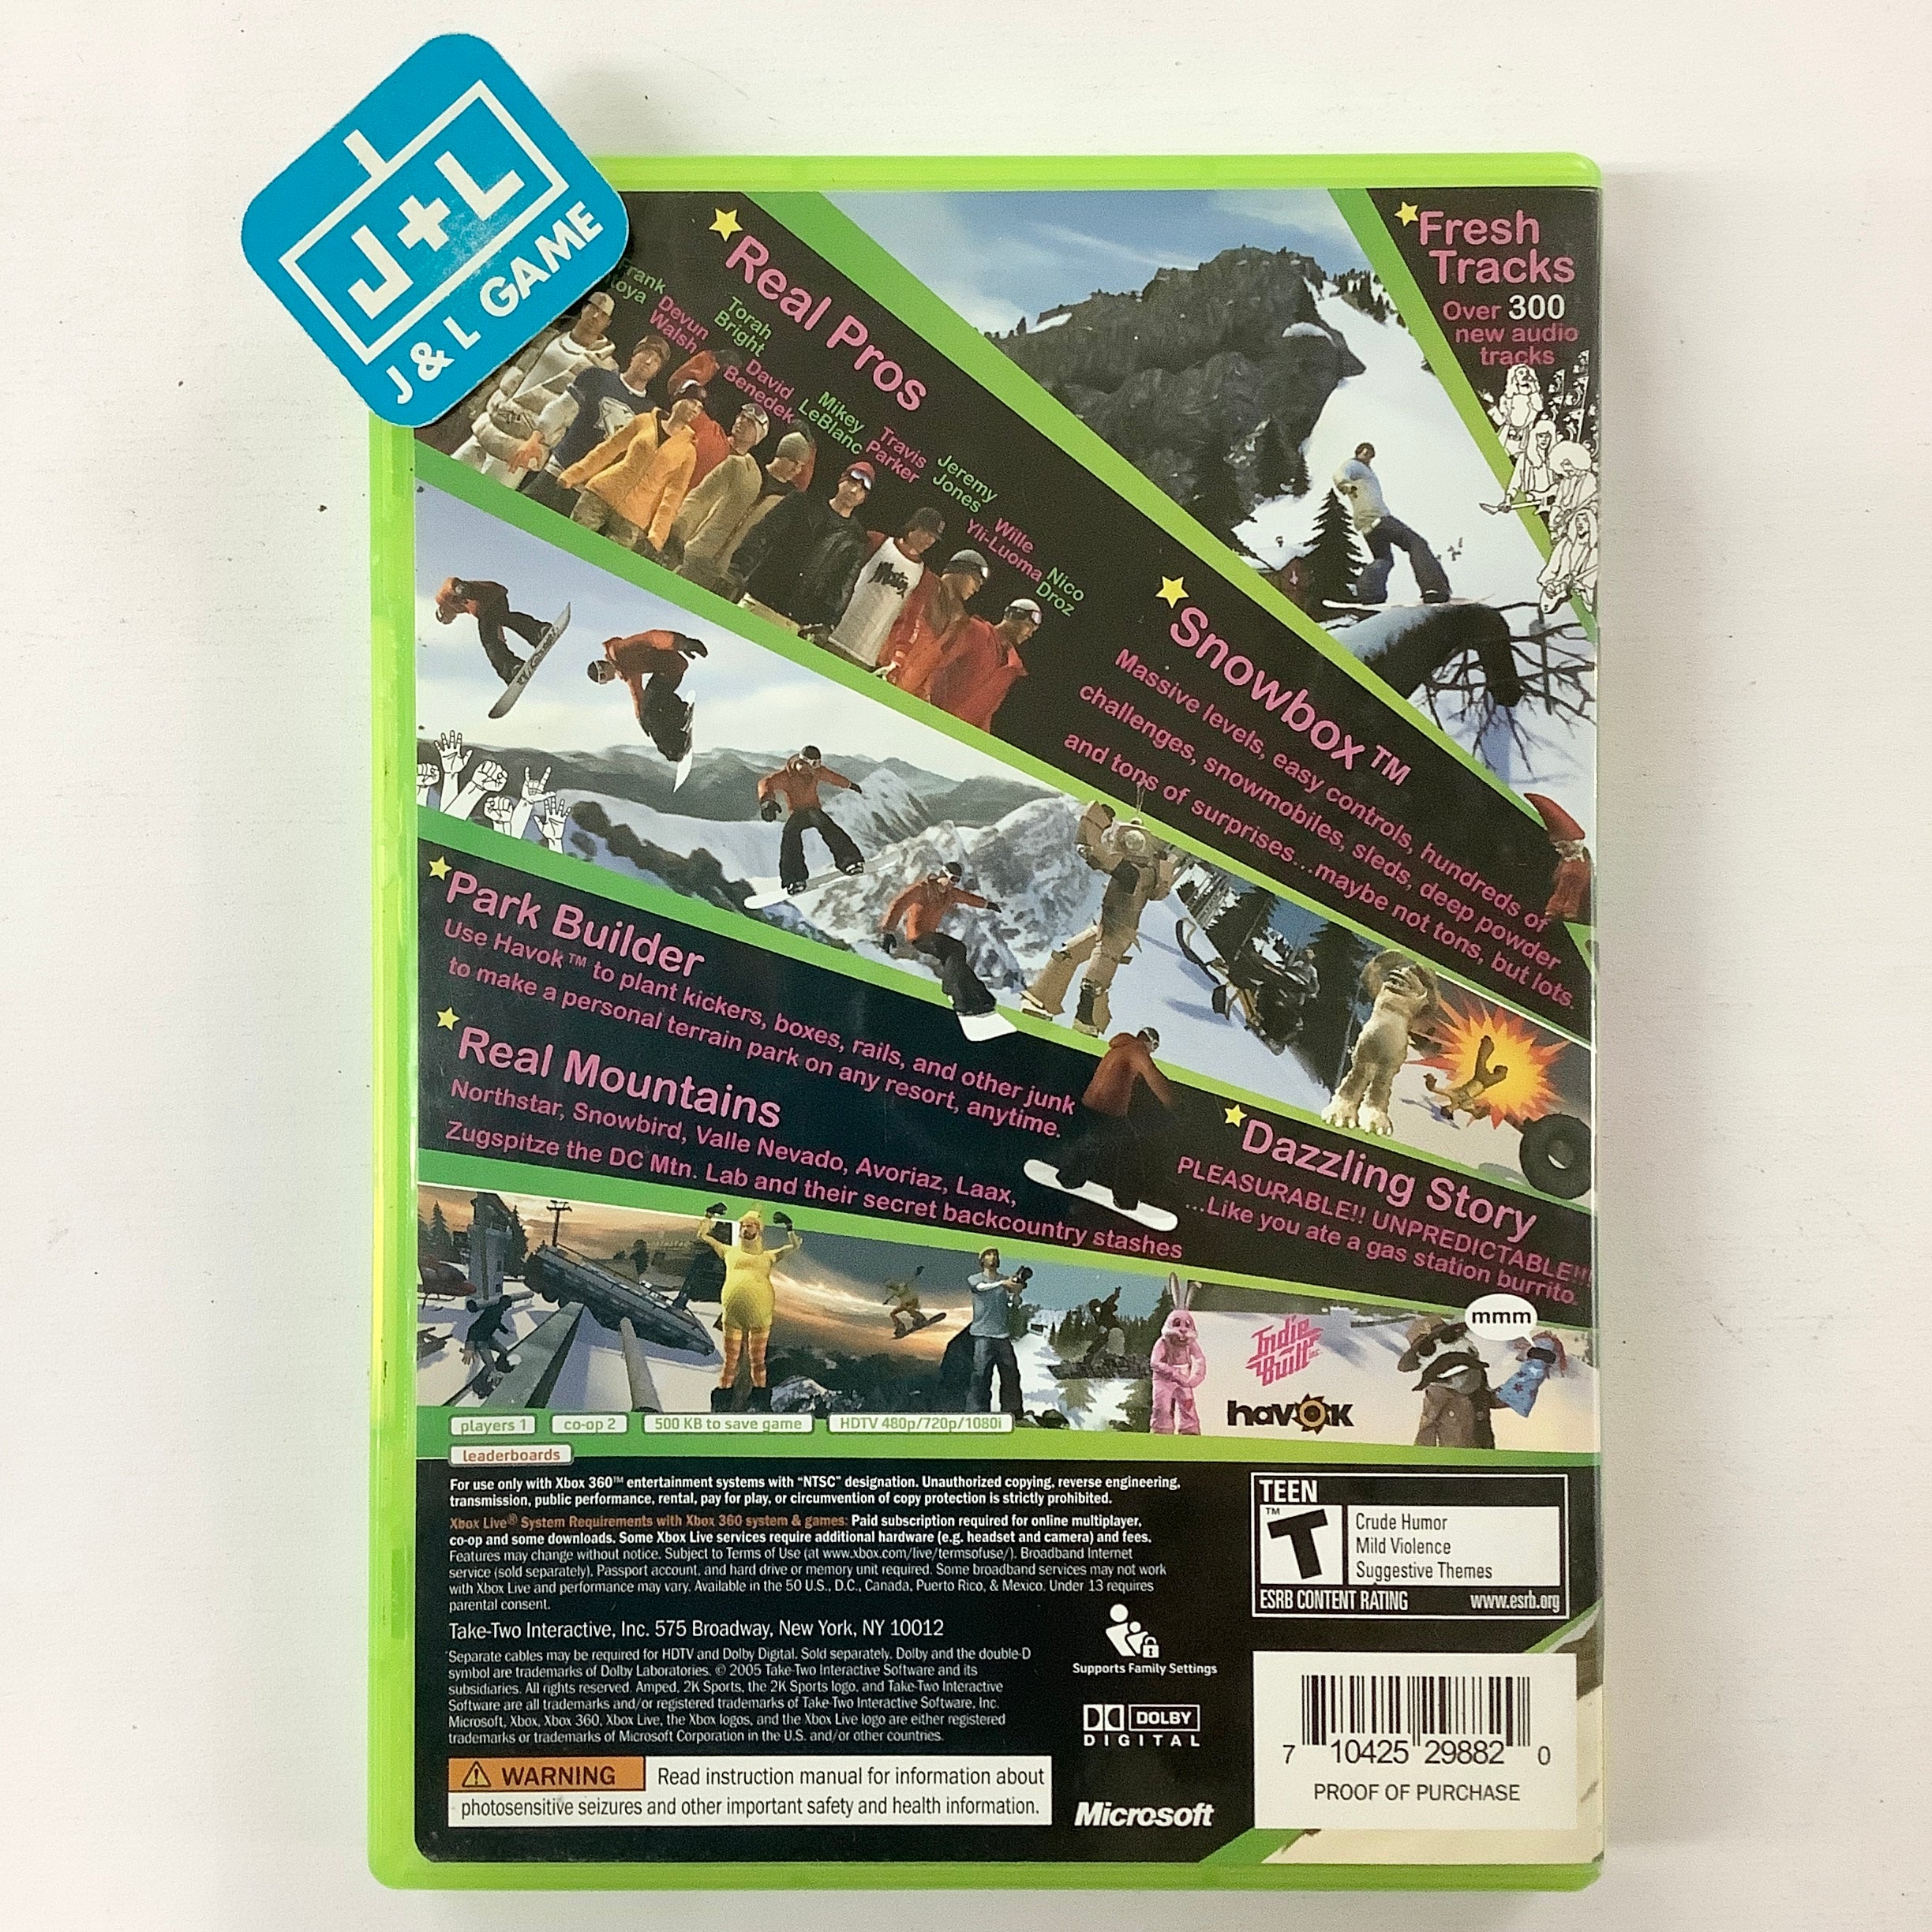 Amped 3 - Xbox 360 [Pre-Owned] Video Games 2K Sports   